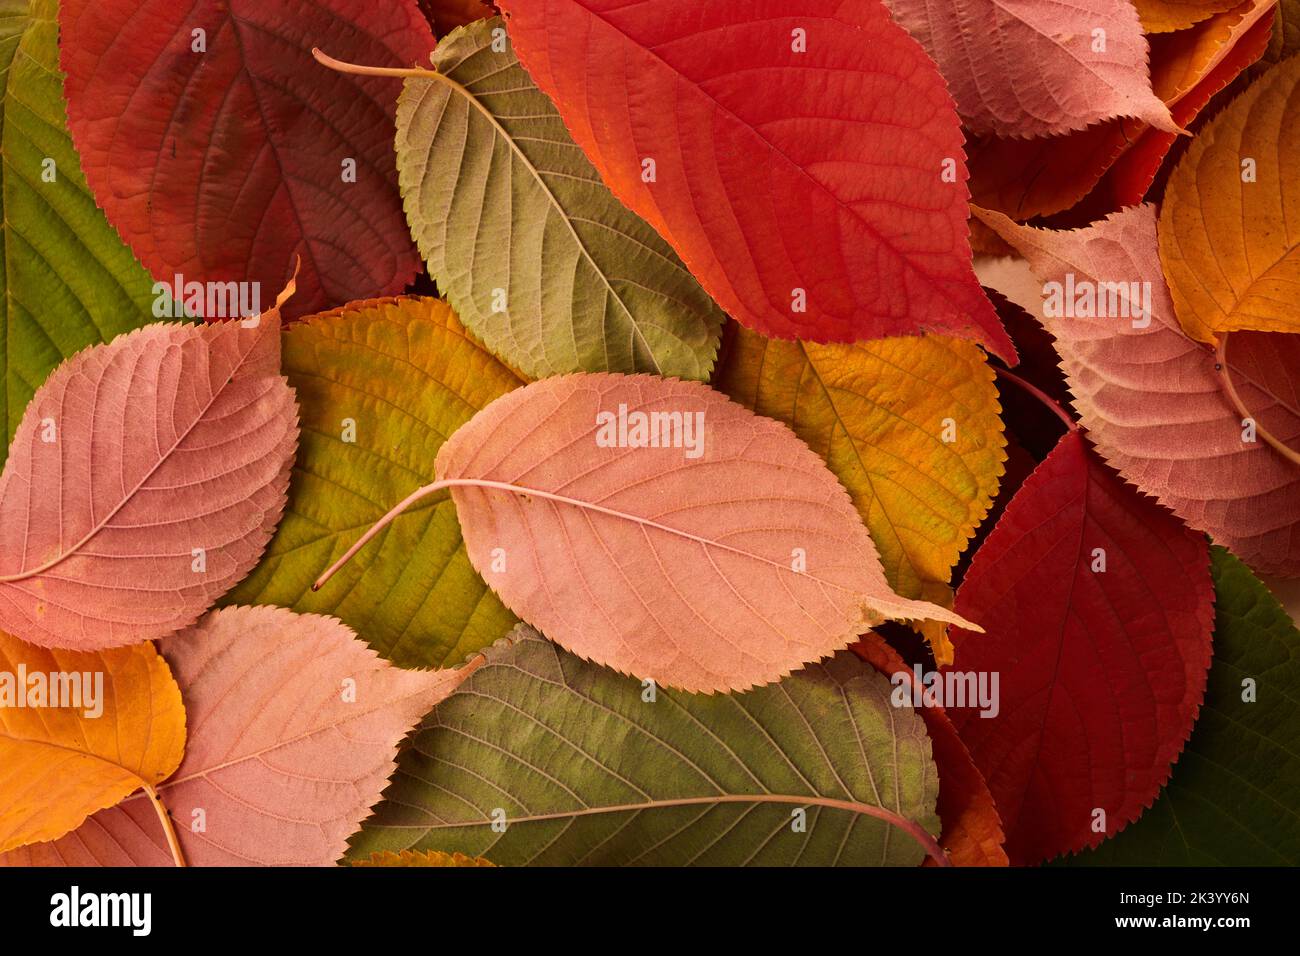 Autumn background. Multicolored leaves lie on the grass. Stock Photo